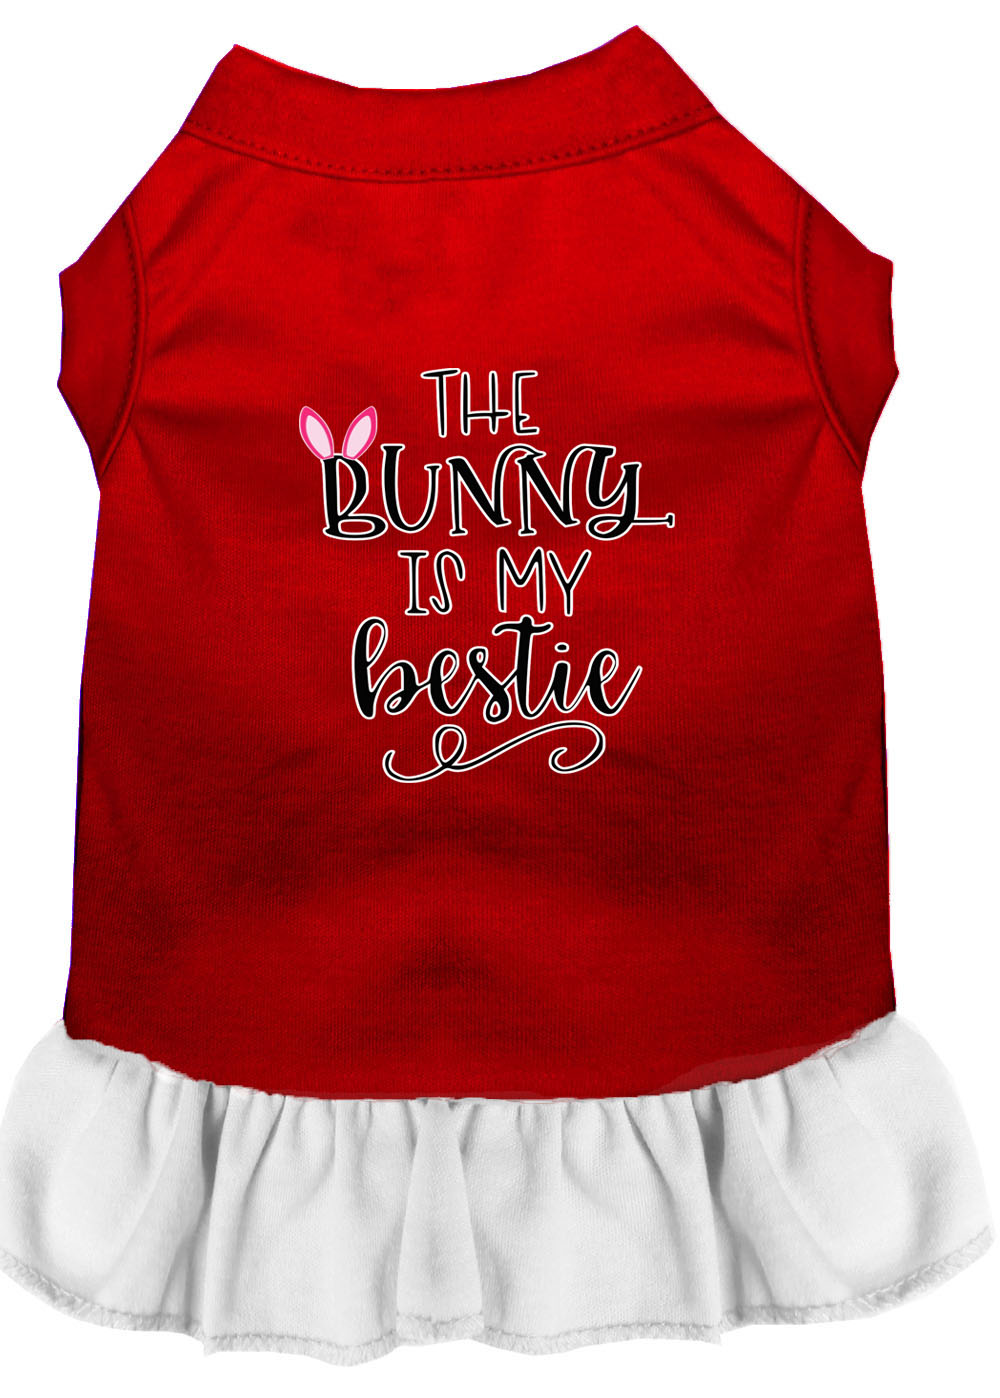 Bunny is my Bestie Screen Print Dog Dress Red with White Sm